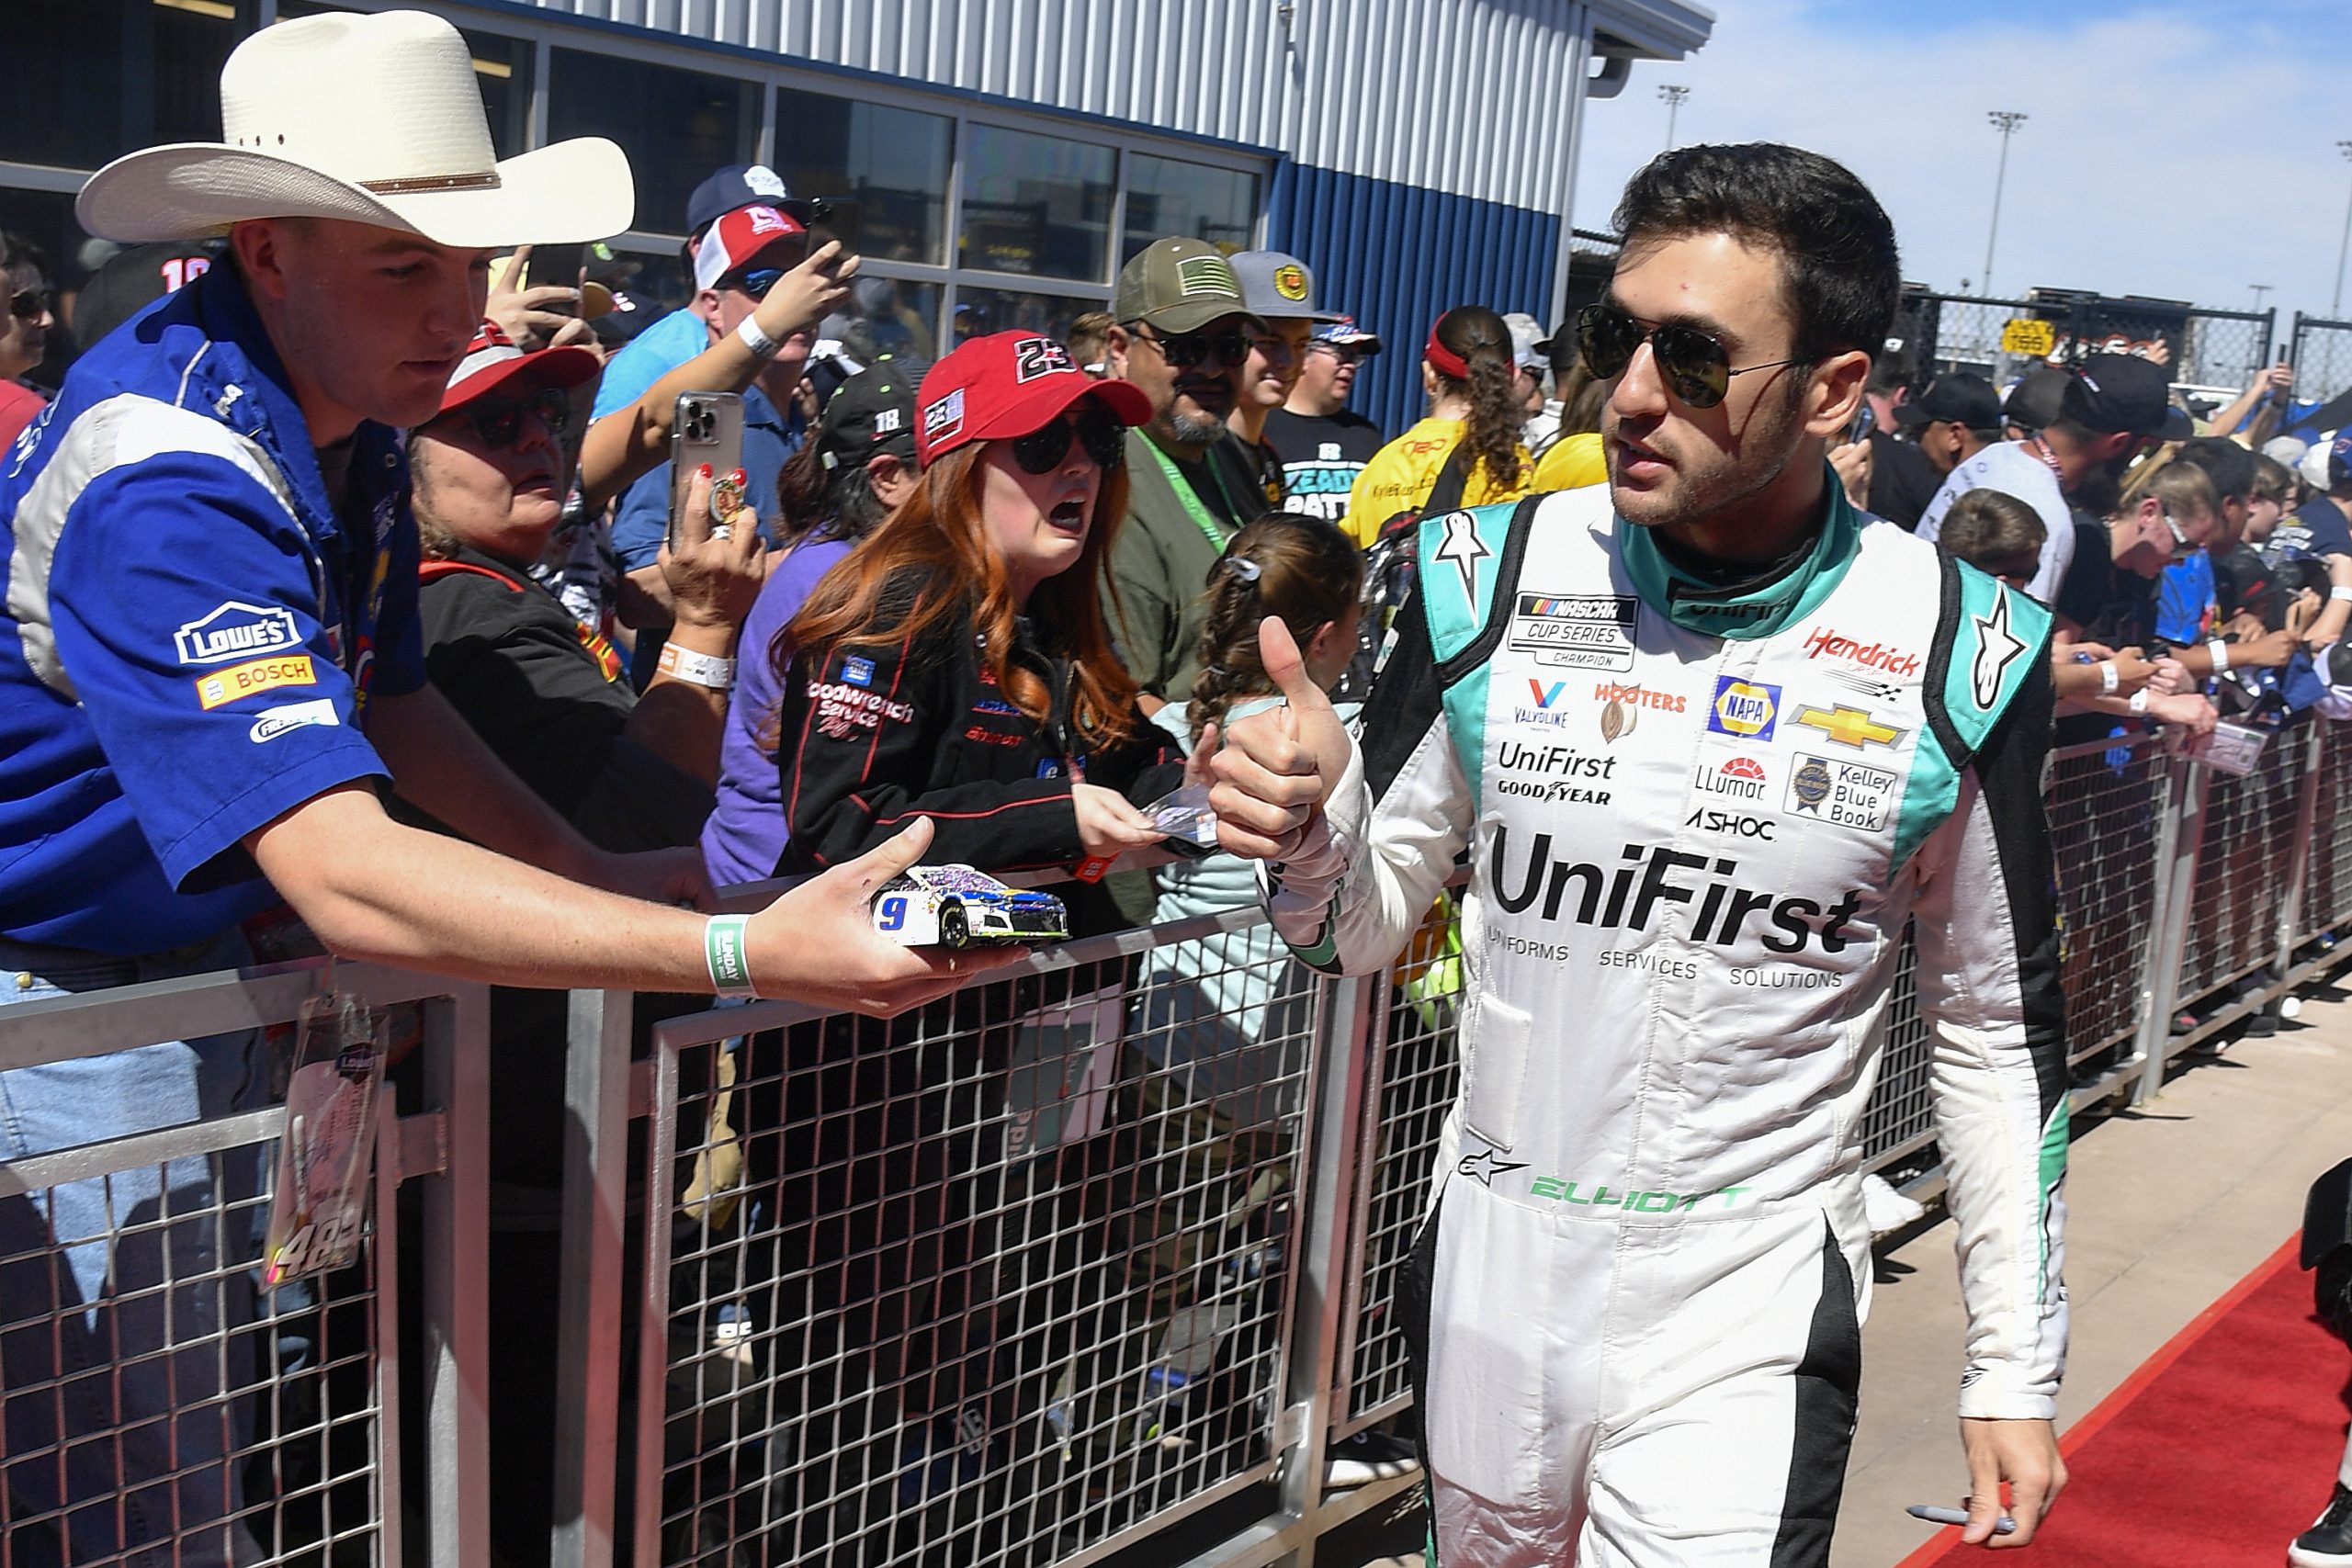 AVONDALE, ARIZONA - MARCH 13: Chase Elliott, driver of the #9 UniFirst Chevrolet, gives a thumbs up to fans during the red carpet prior to the Ruoff Mortgage 500 during at Phoenix Raceway on March 13, 2022 in Avondale, Arizona. (Photo by Logan Riely/Getty Images)